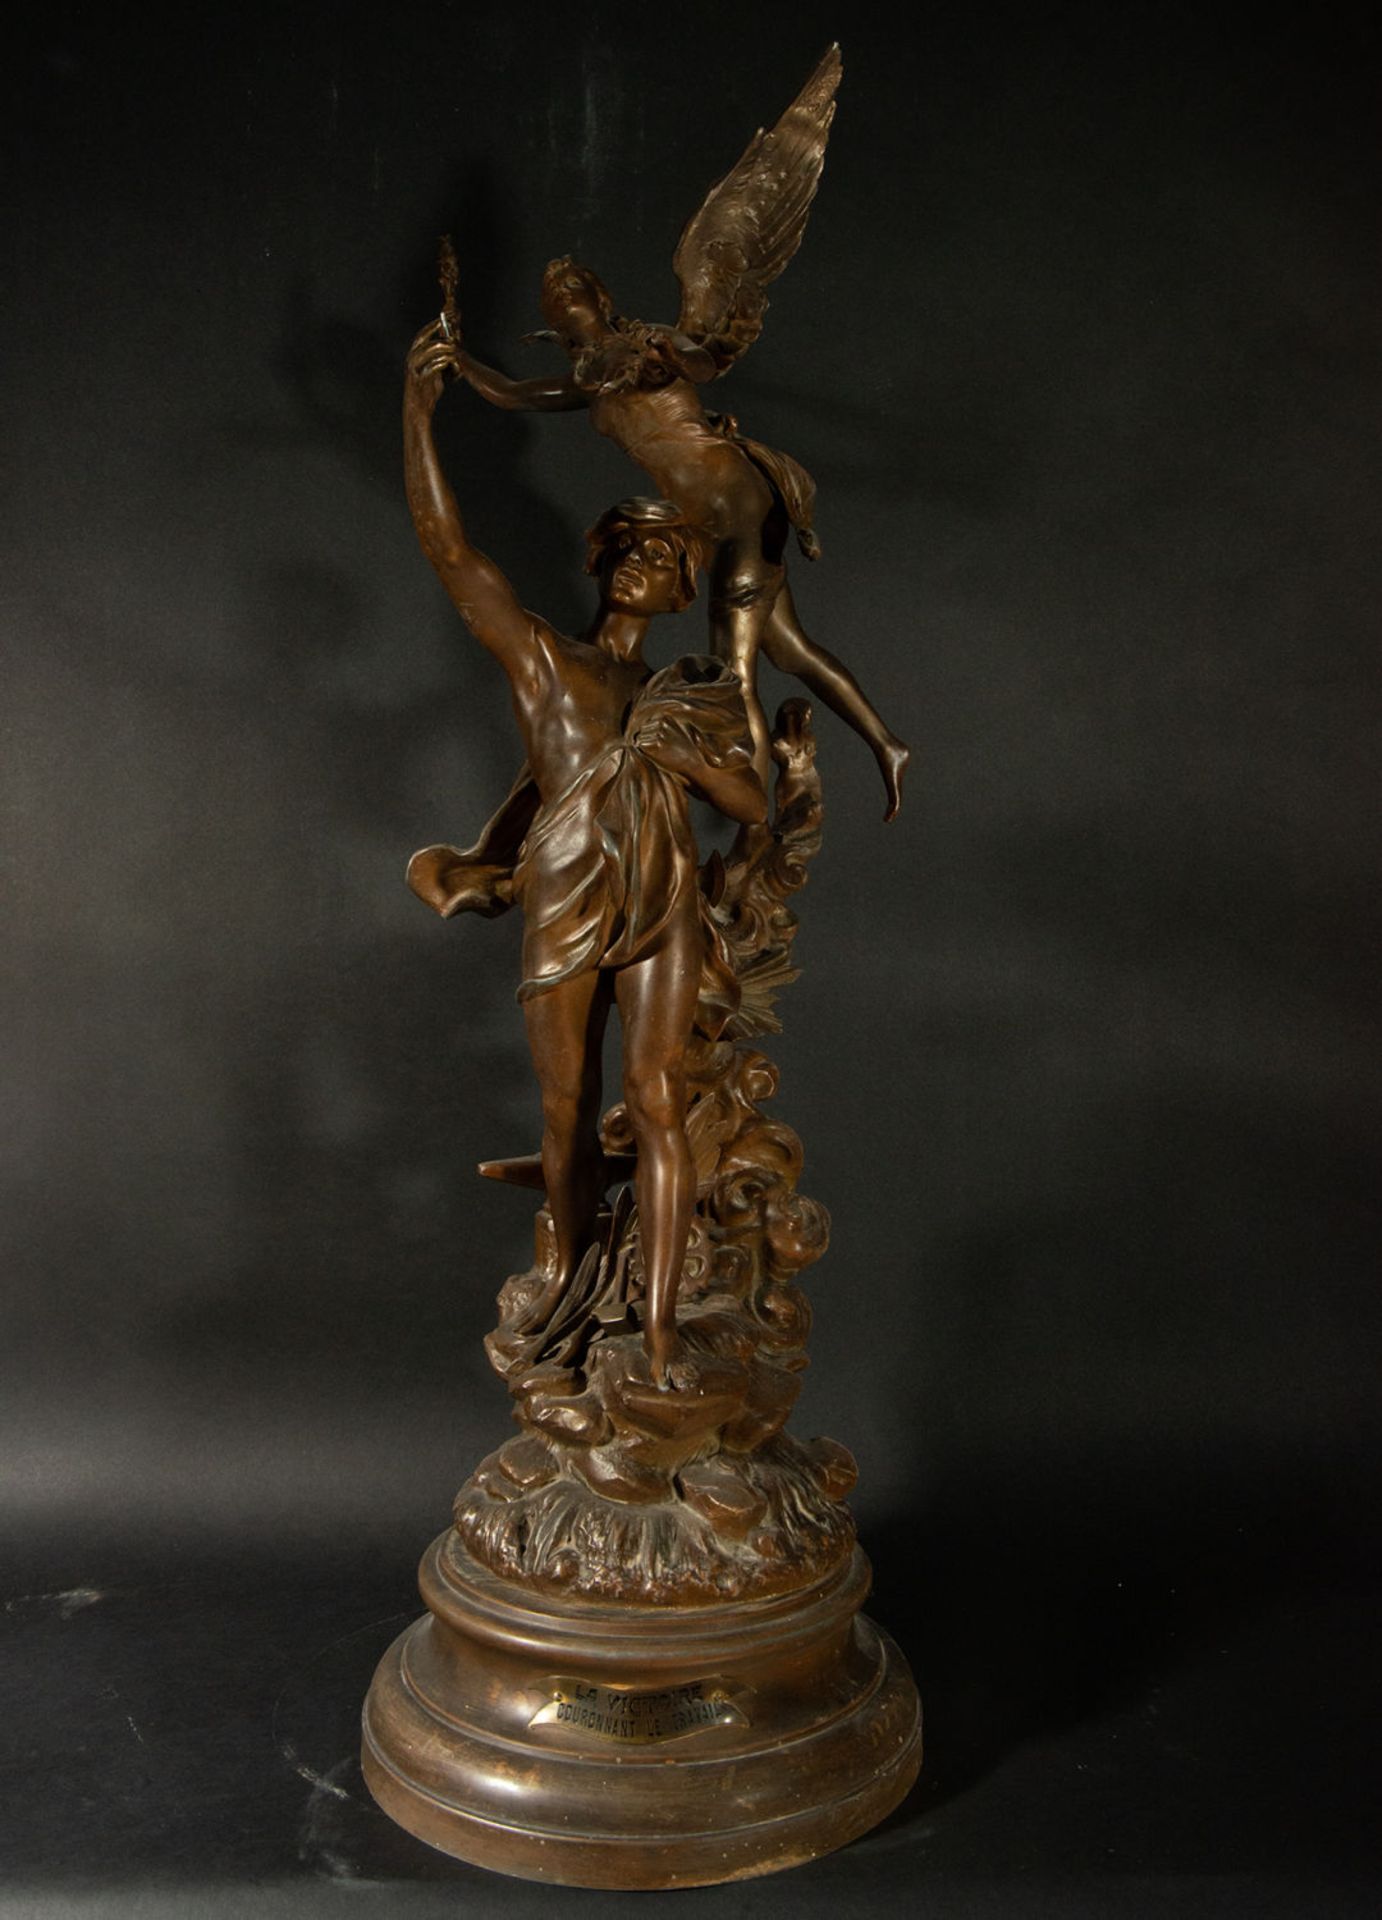 Goddess of Victory, 19th century French work